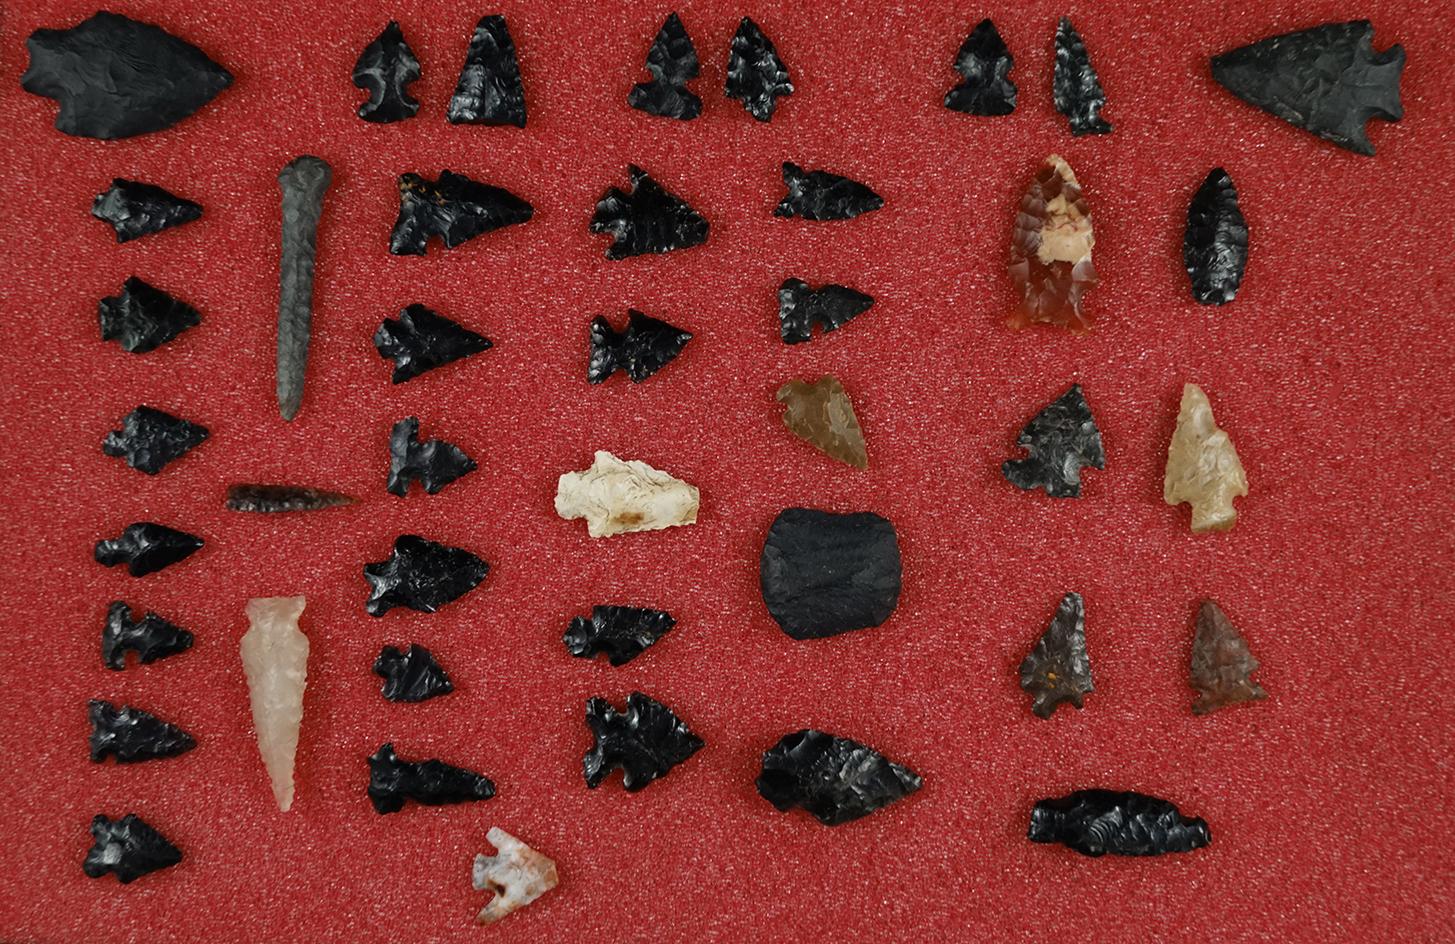 Group of assorted points including obsidian arrowheads -Burns Oregon and Gempoints - WA.